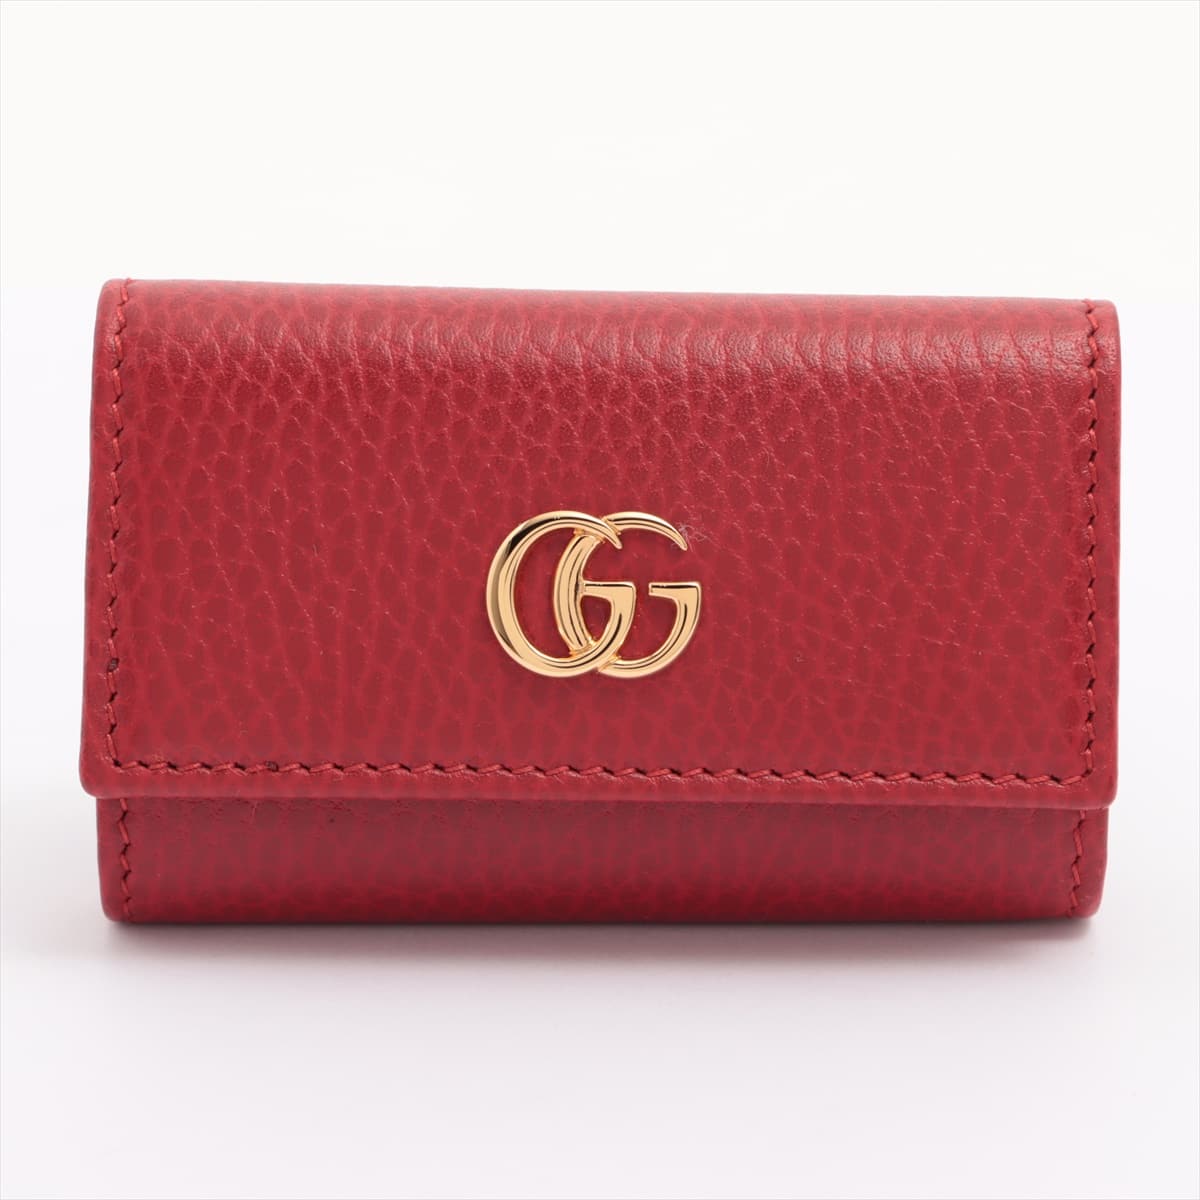 Gucci GG Marmont Double G 456118 Leather Key Case Red